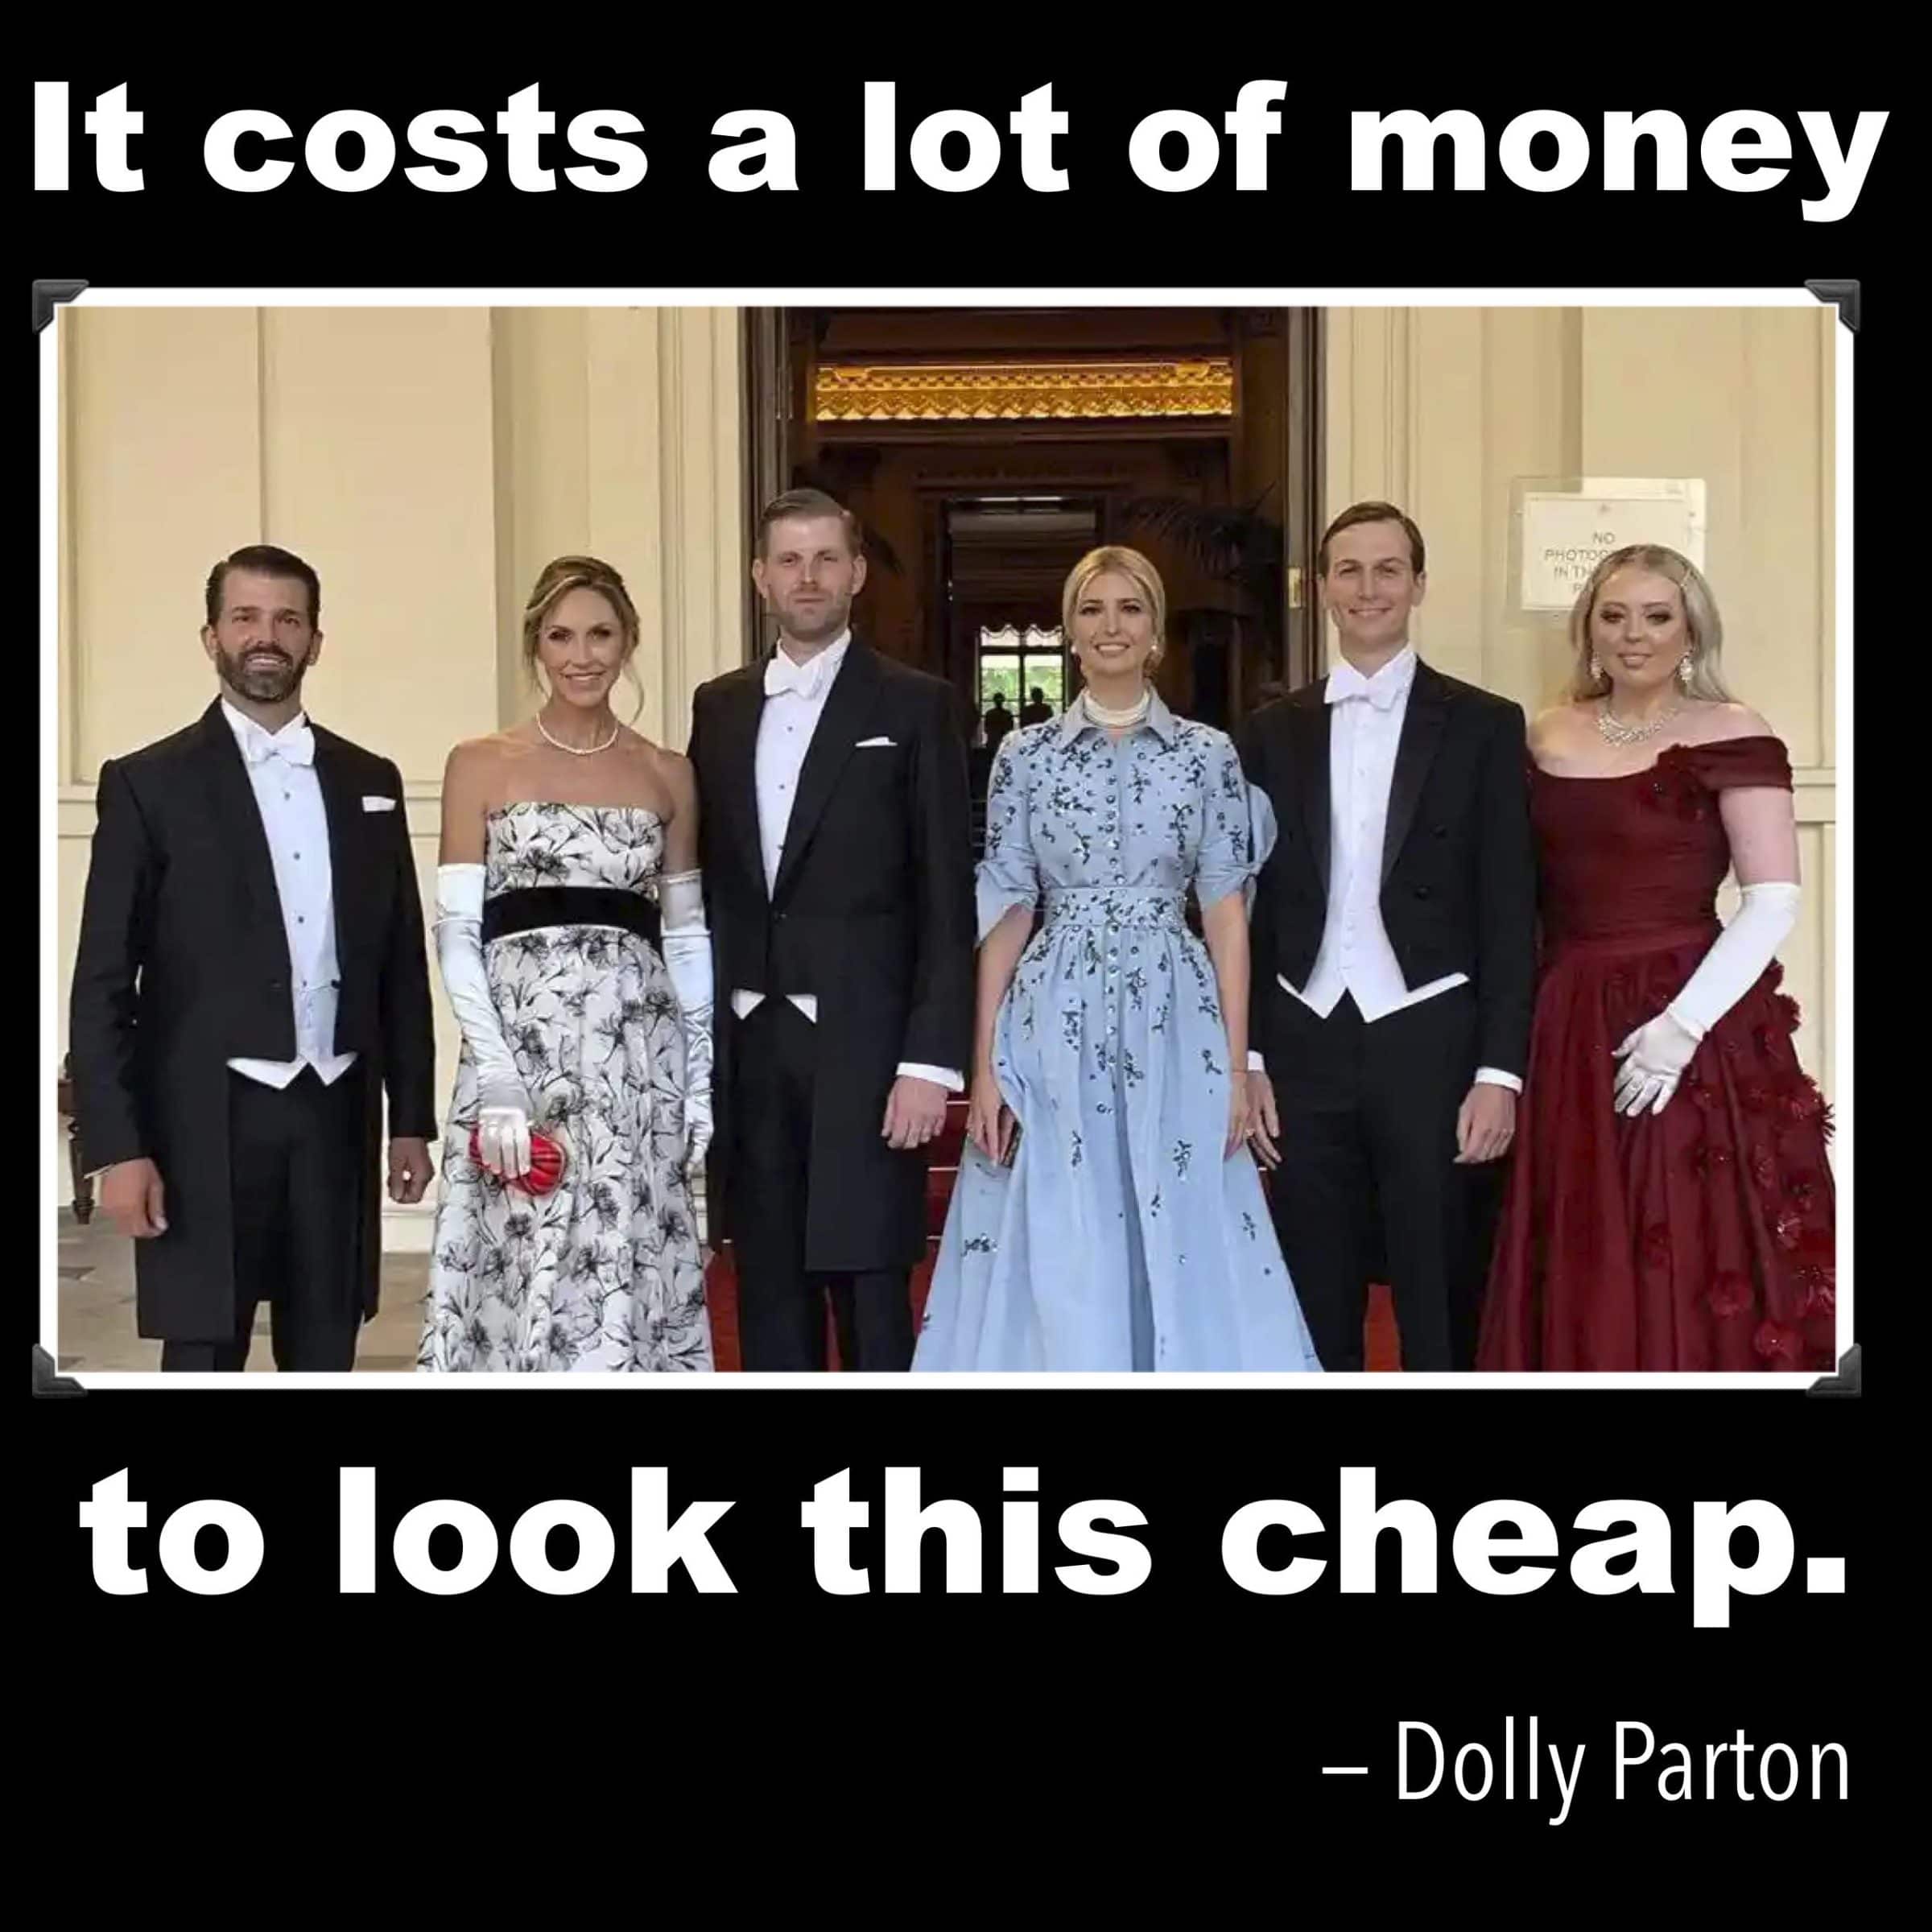 political political-memes political text: It costs a lot of money to look this cheap. - Dolly Parton 